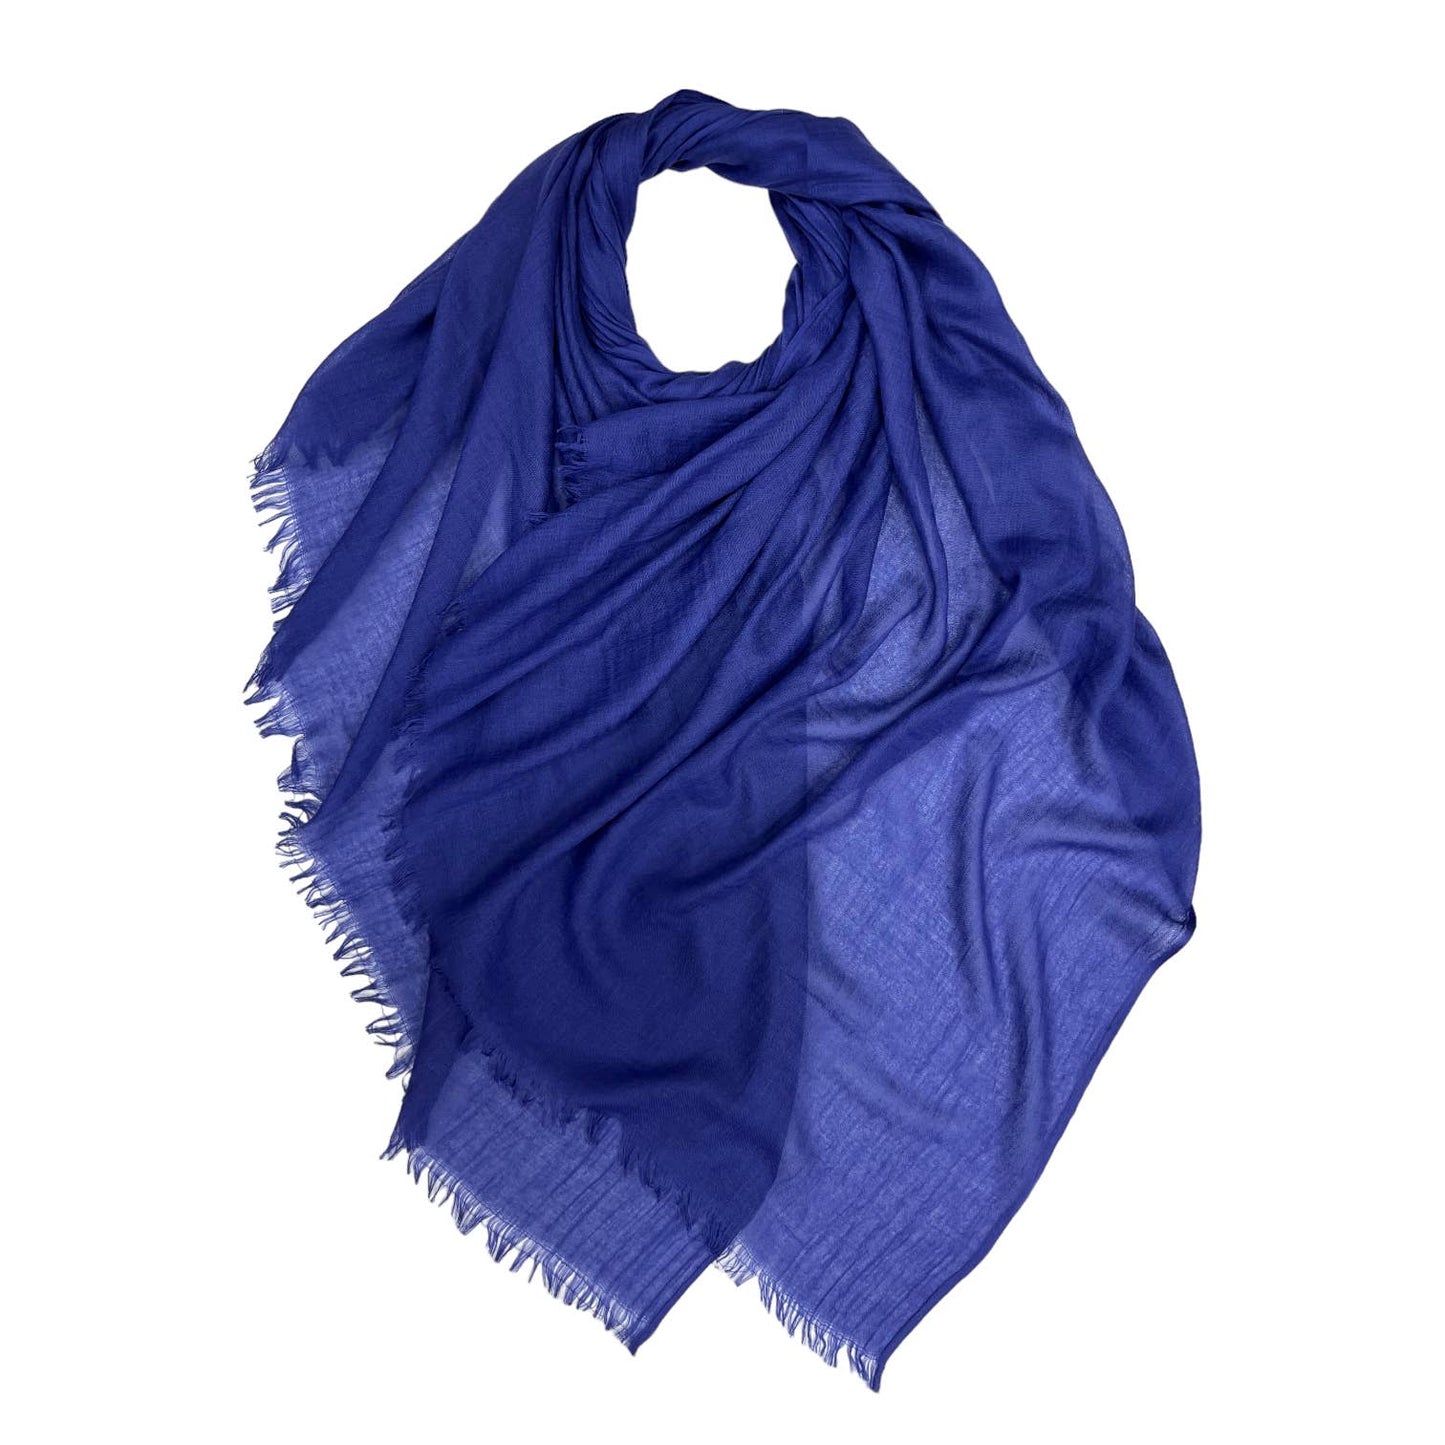 Classic plain cotton blend scarf finished with fringes: Royal Blue